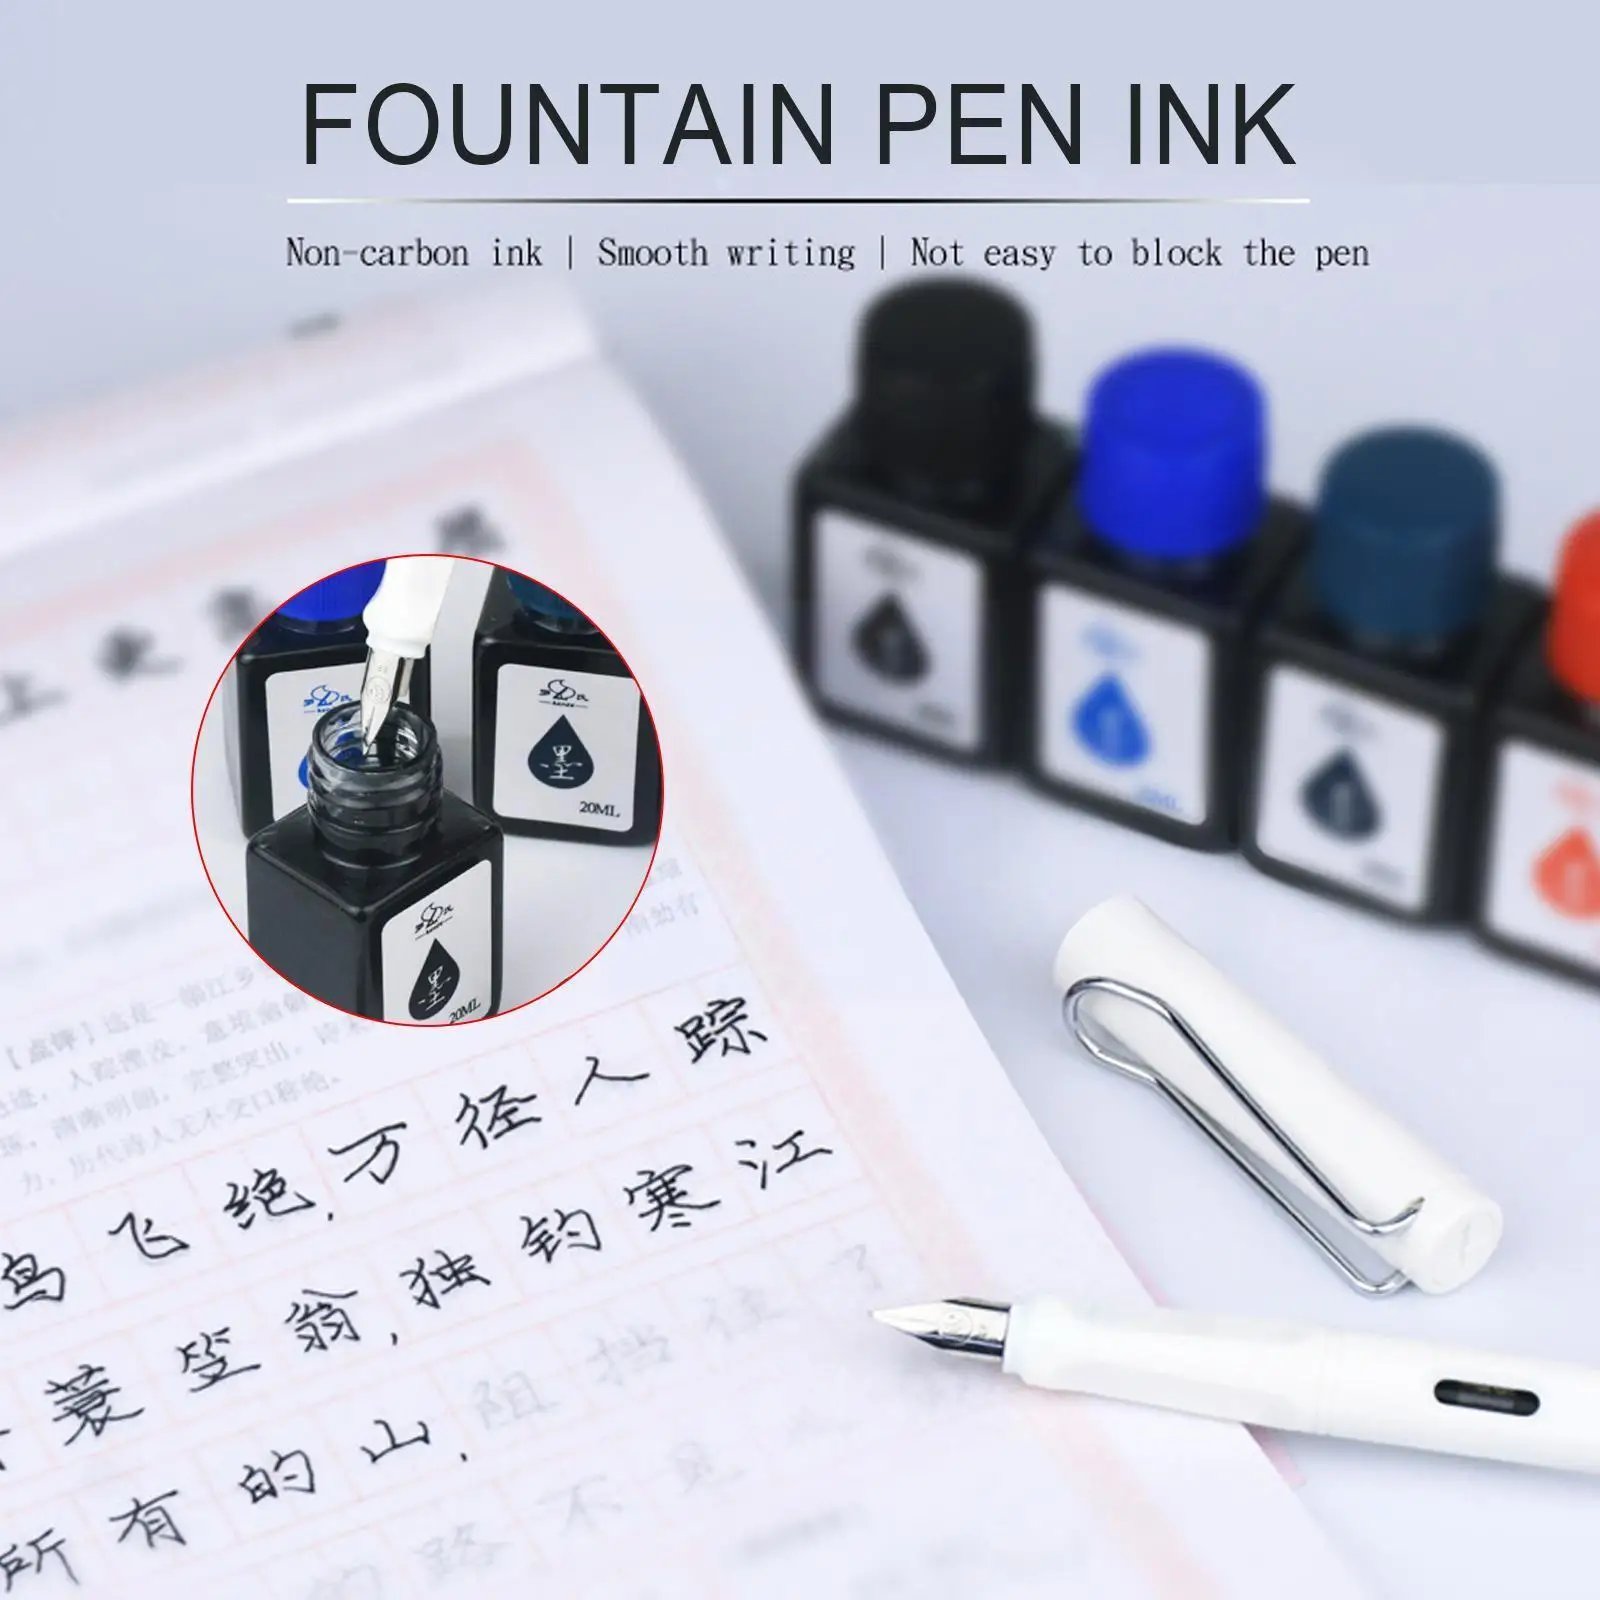 

20ml Fountain Pen Ink For Refilling Inks Permanent Instantly Dry Graffiti Oil For Marker Pens Stationery School Office Supp H5Z5